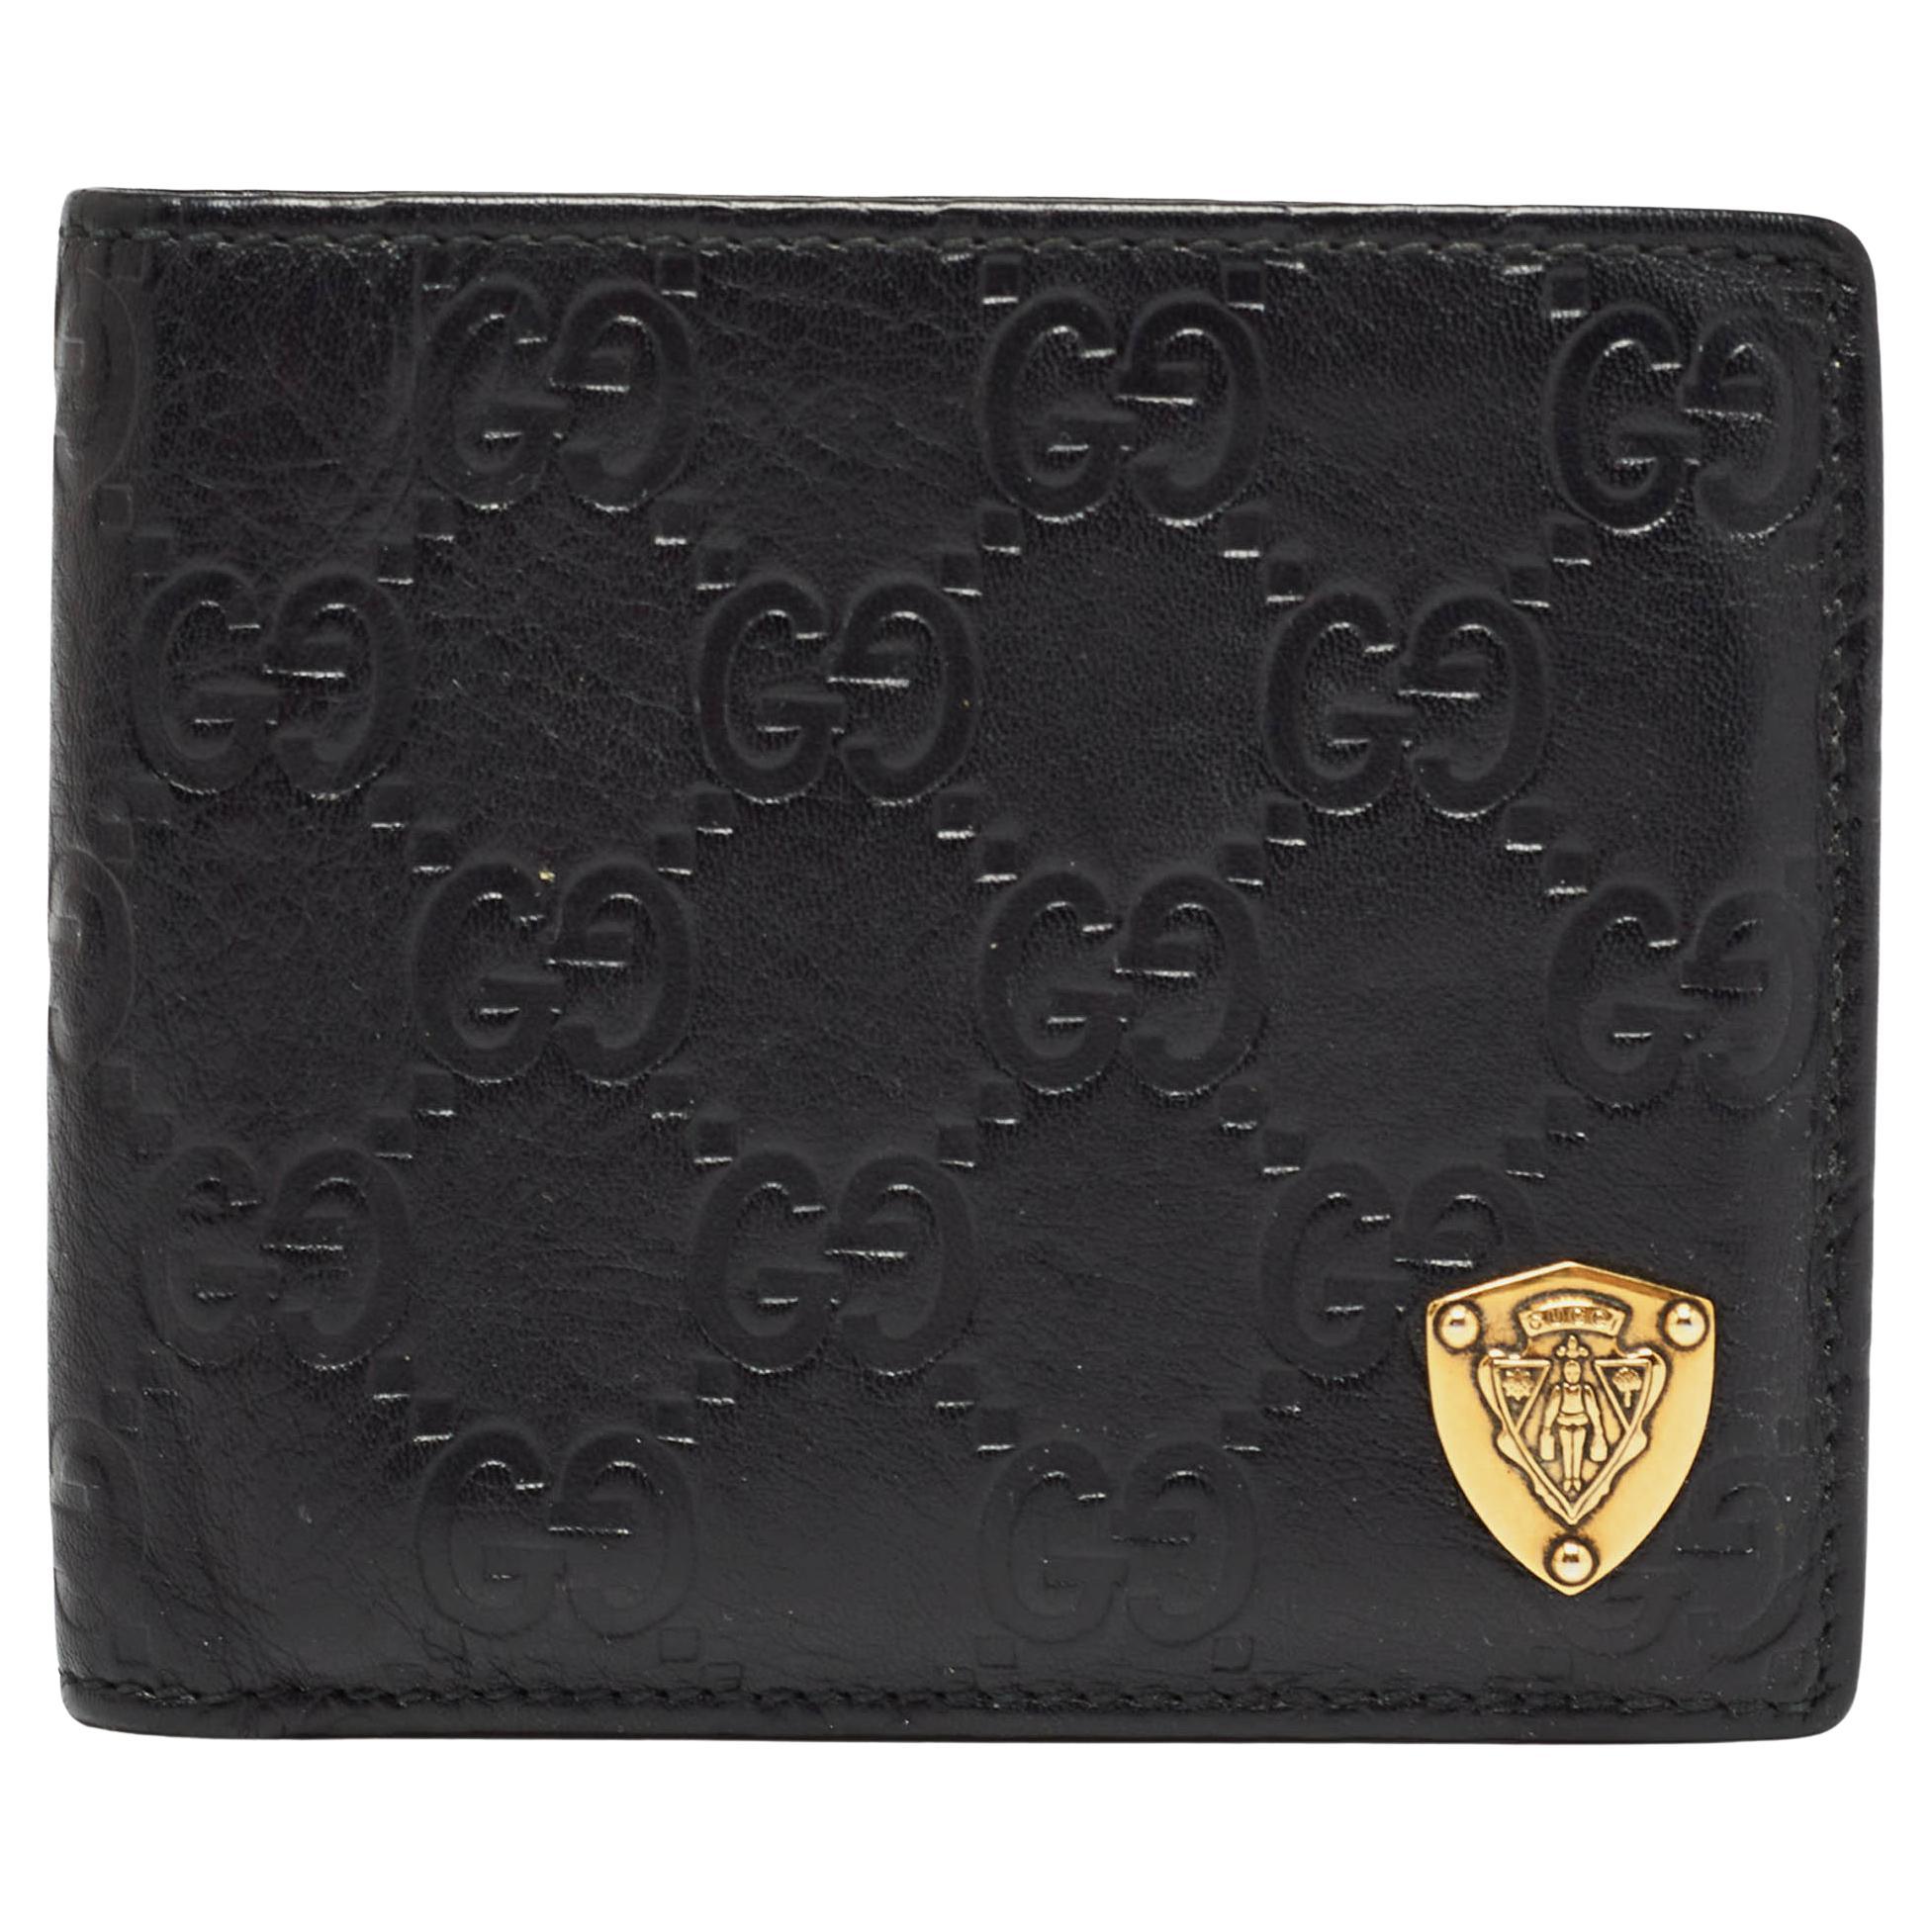 Gucci Black Guccissima Leather Crest Bifold Wallet For Sale